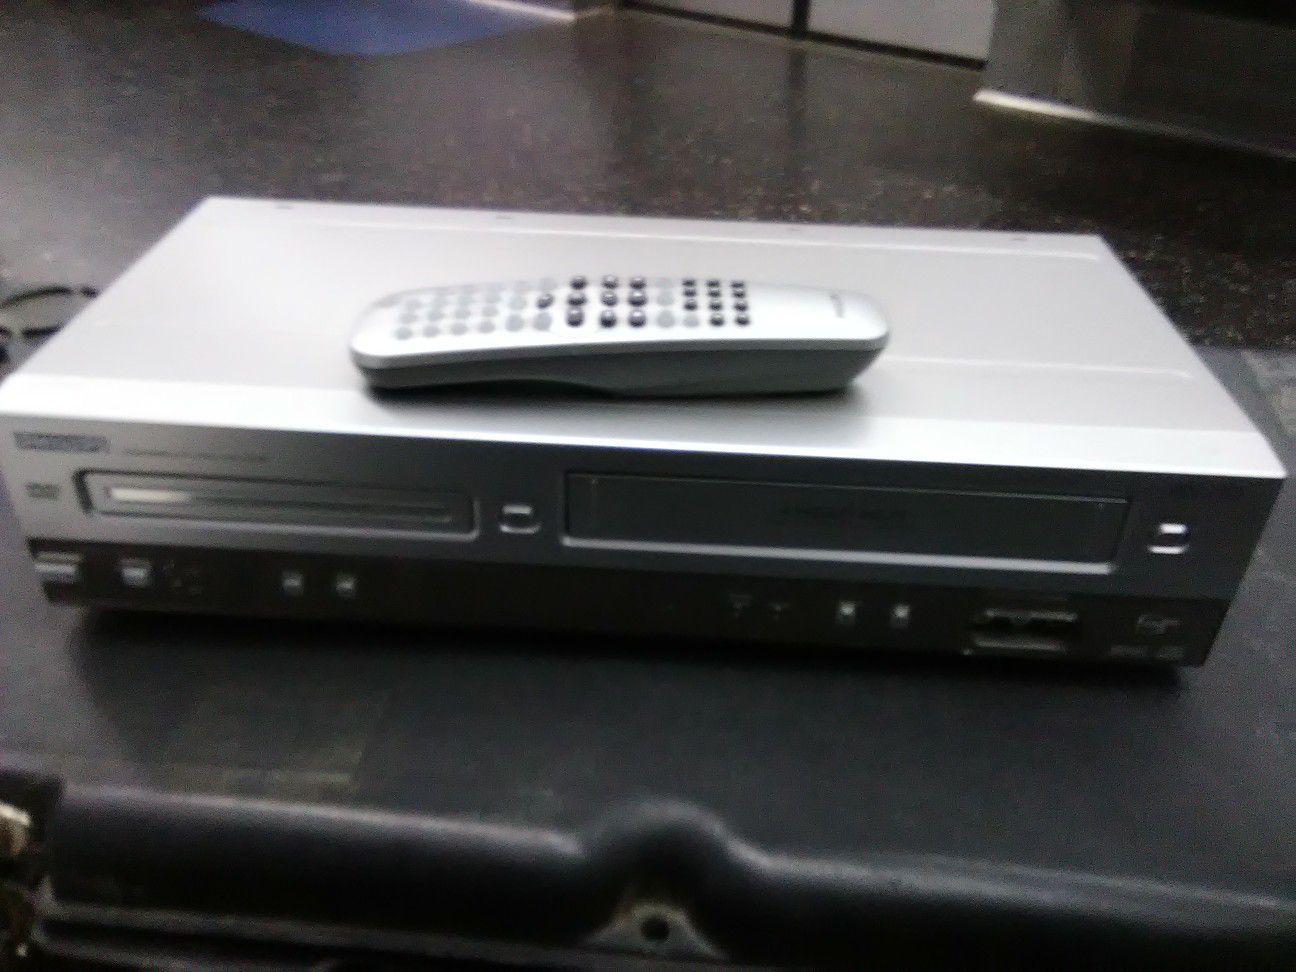 Phillips DVD and VCR player with remote control